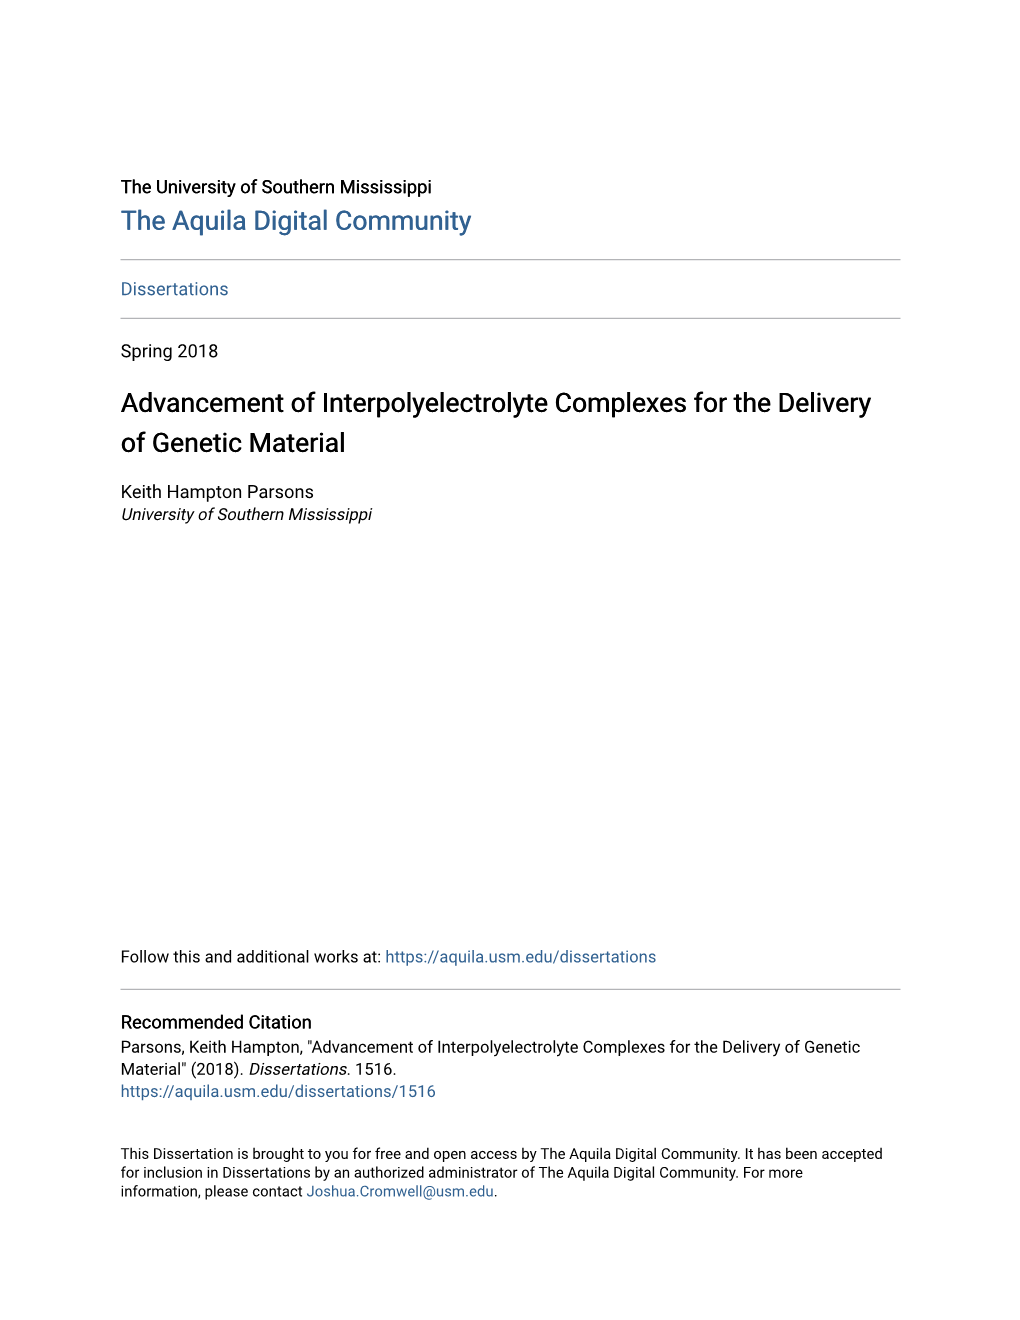 Advancement of Interpolyelectrolyte Complexes for the Delivery of Genetic Material